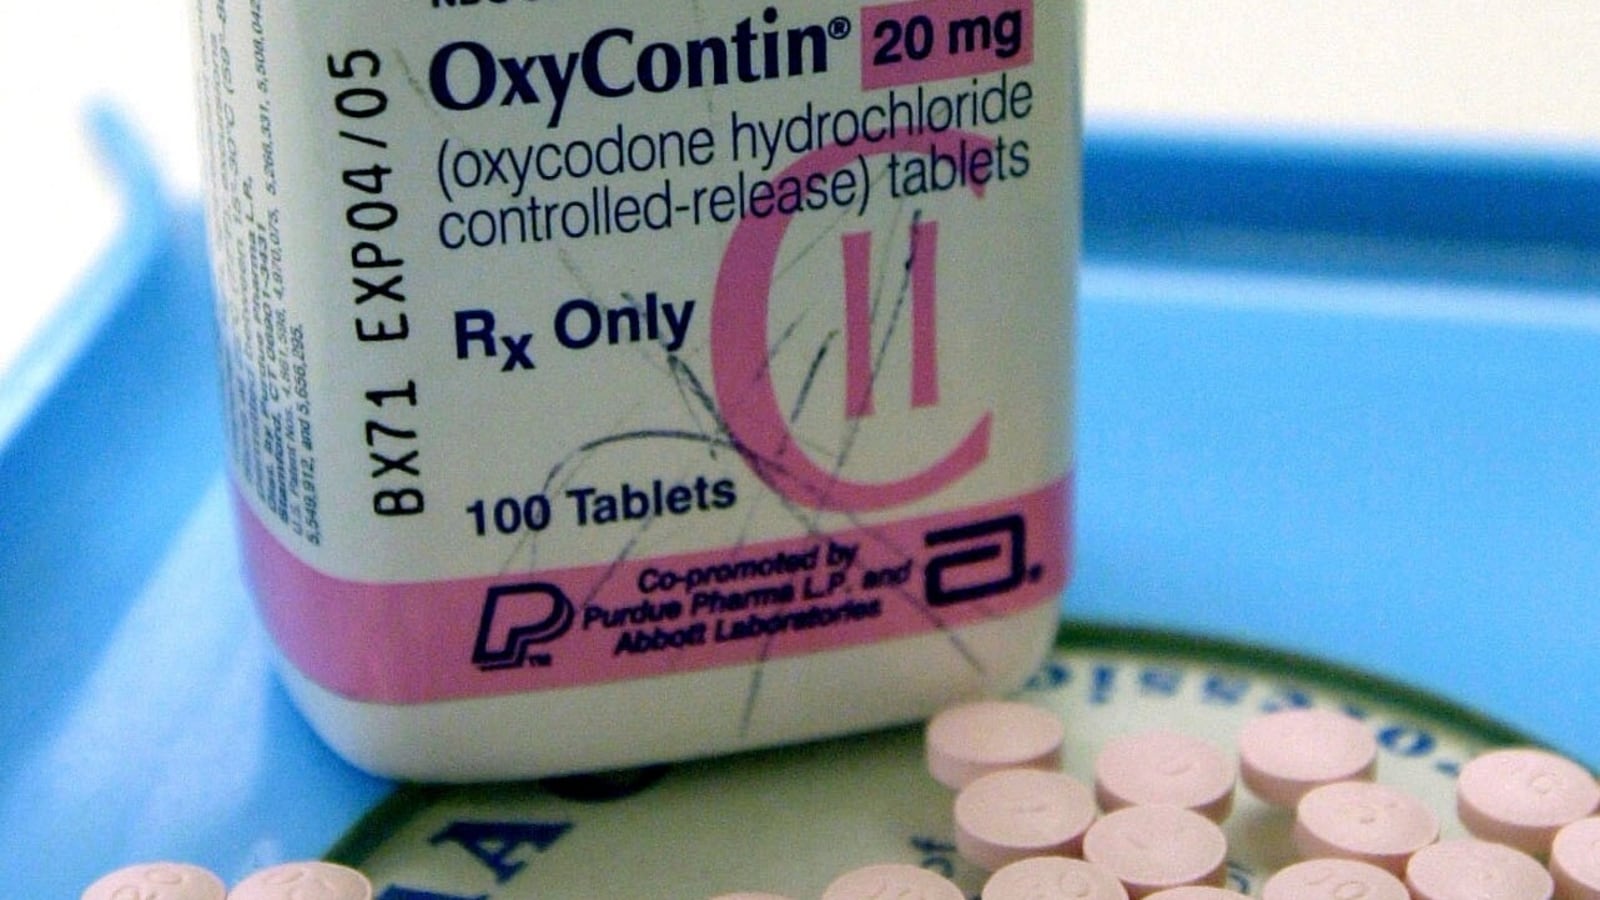 US Supreme Court blocks bankruptcy settlement with OxyContin maker Purdue Pharma